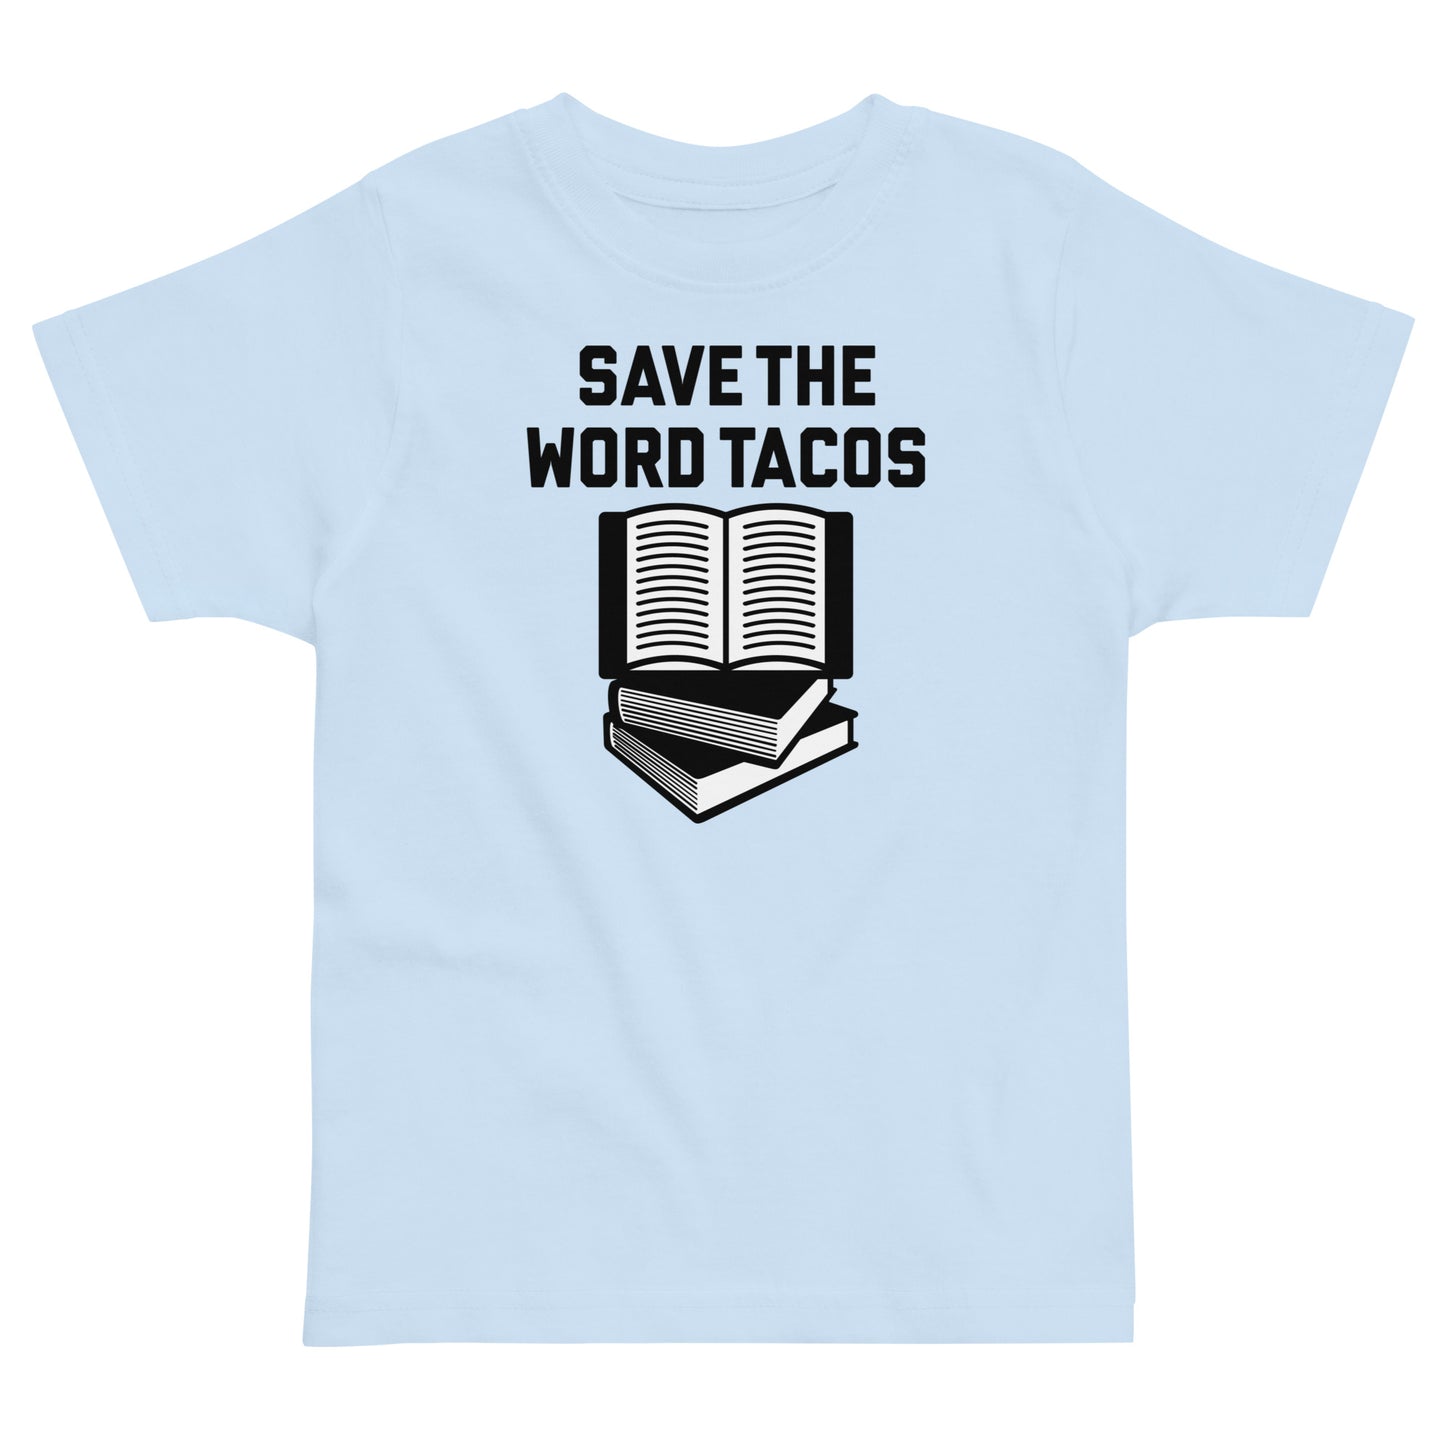 Save The Word Tacos Kid's Toddler Tee